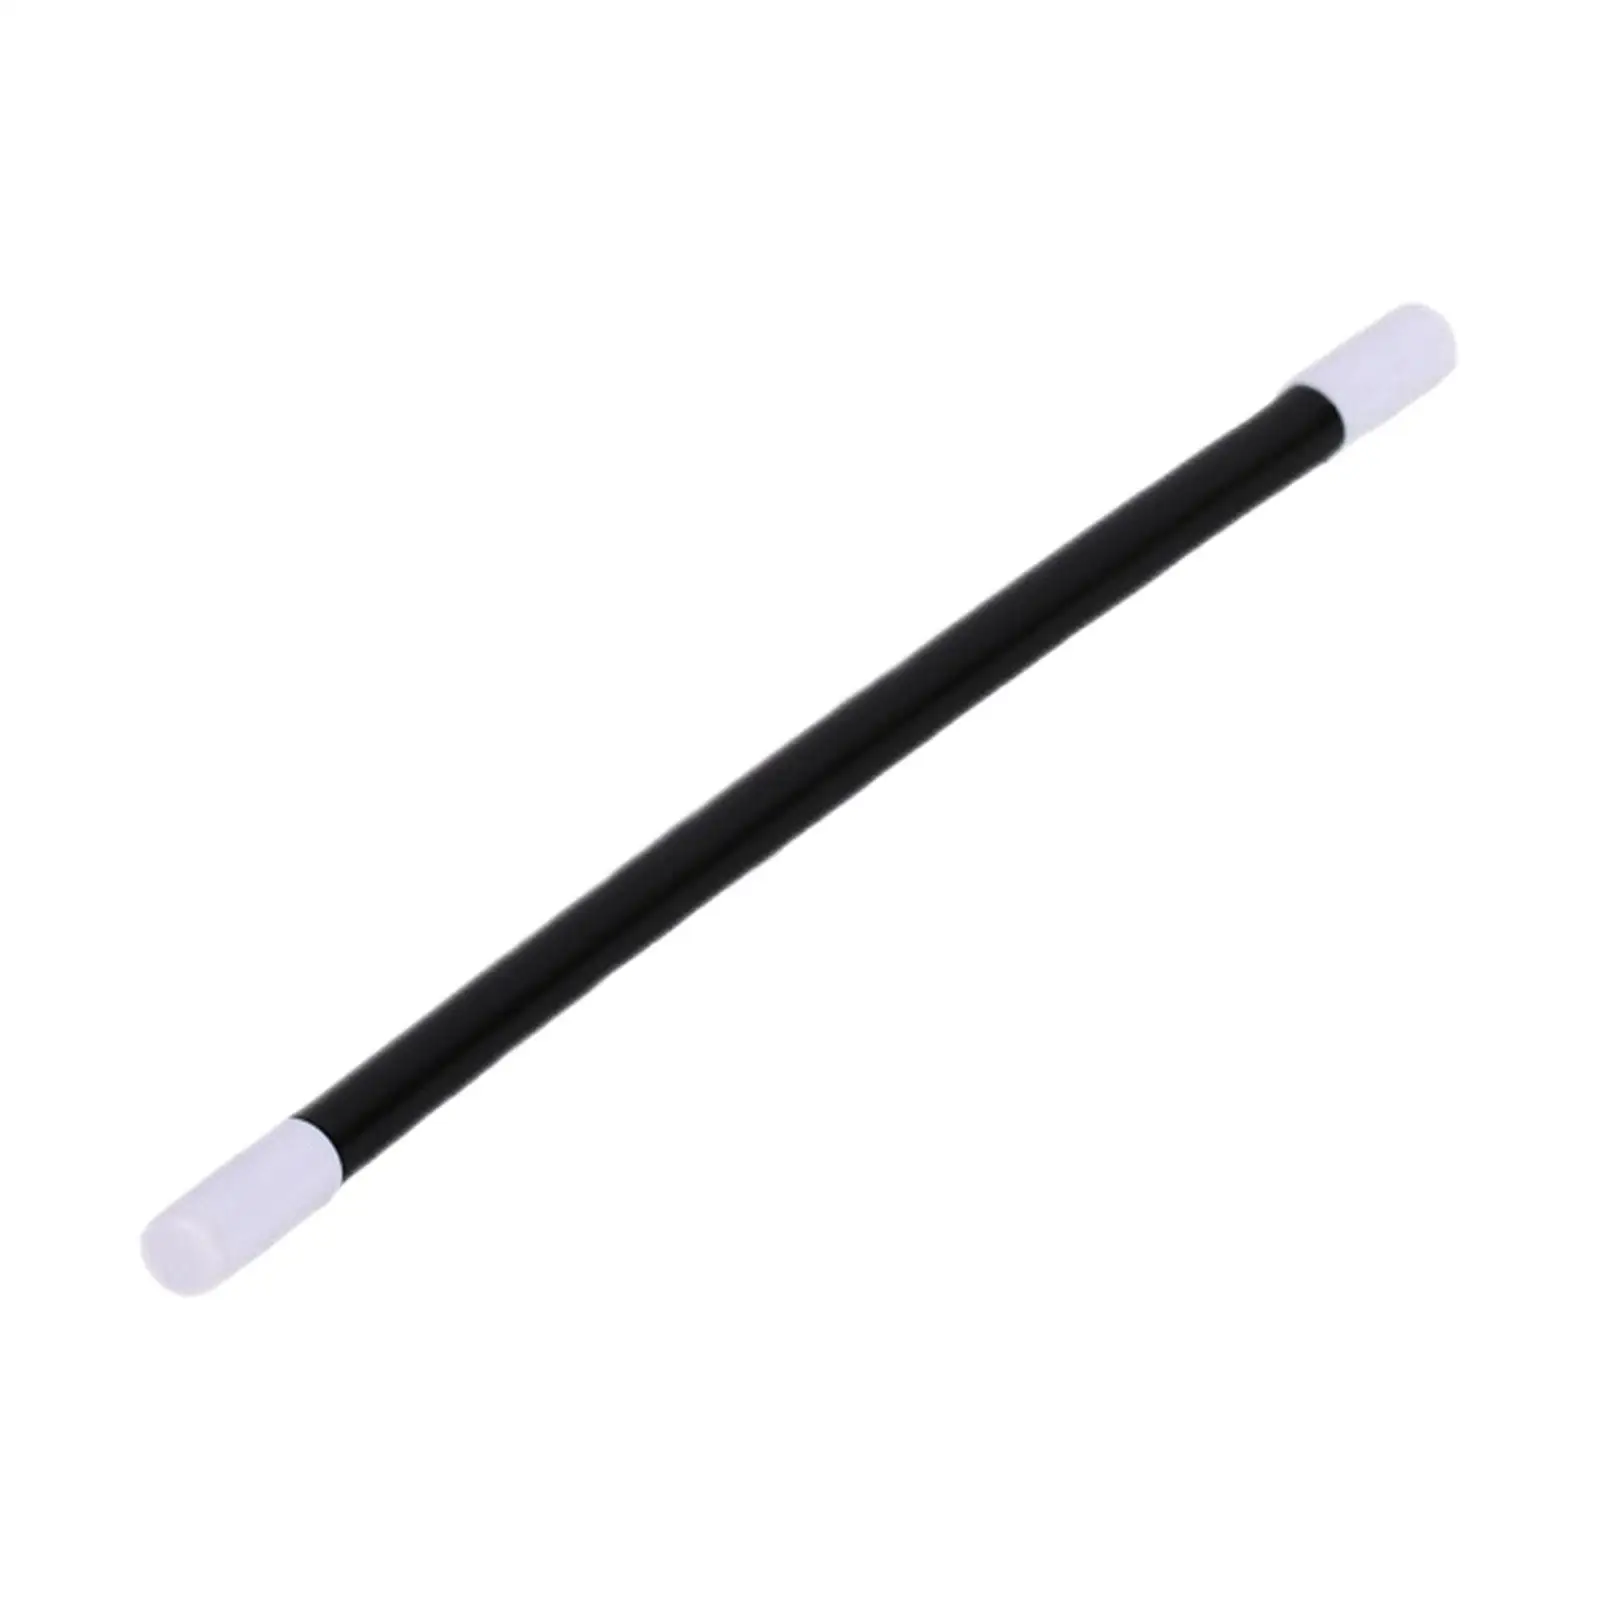 Jack-up Magic Stick Creative Self Rising Magic Wand Stage Magic Prop Magic  Trick Toys For Beginners Party Performance Tool Gift - AliExpress